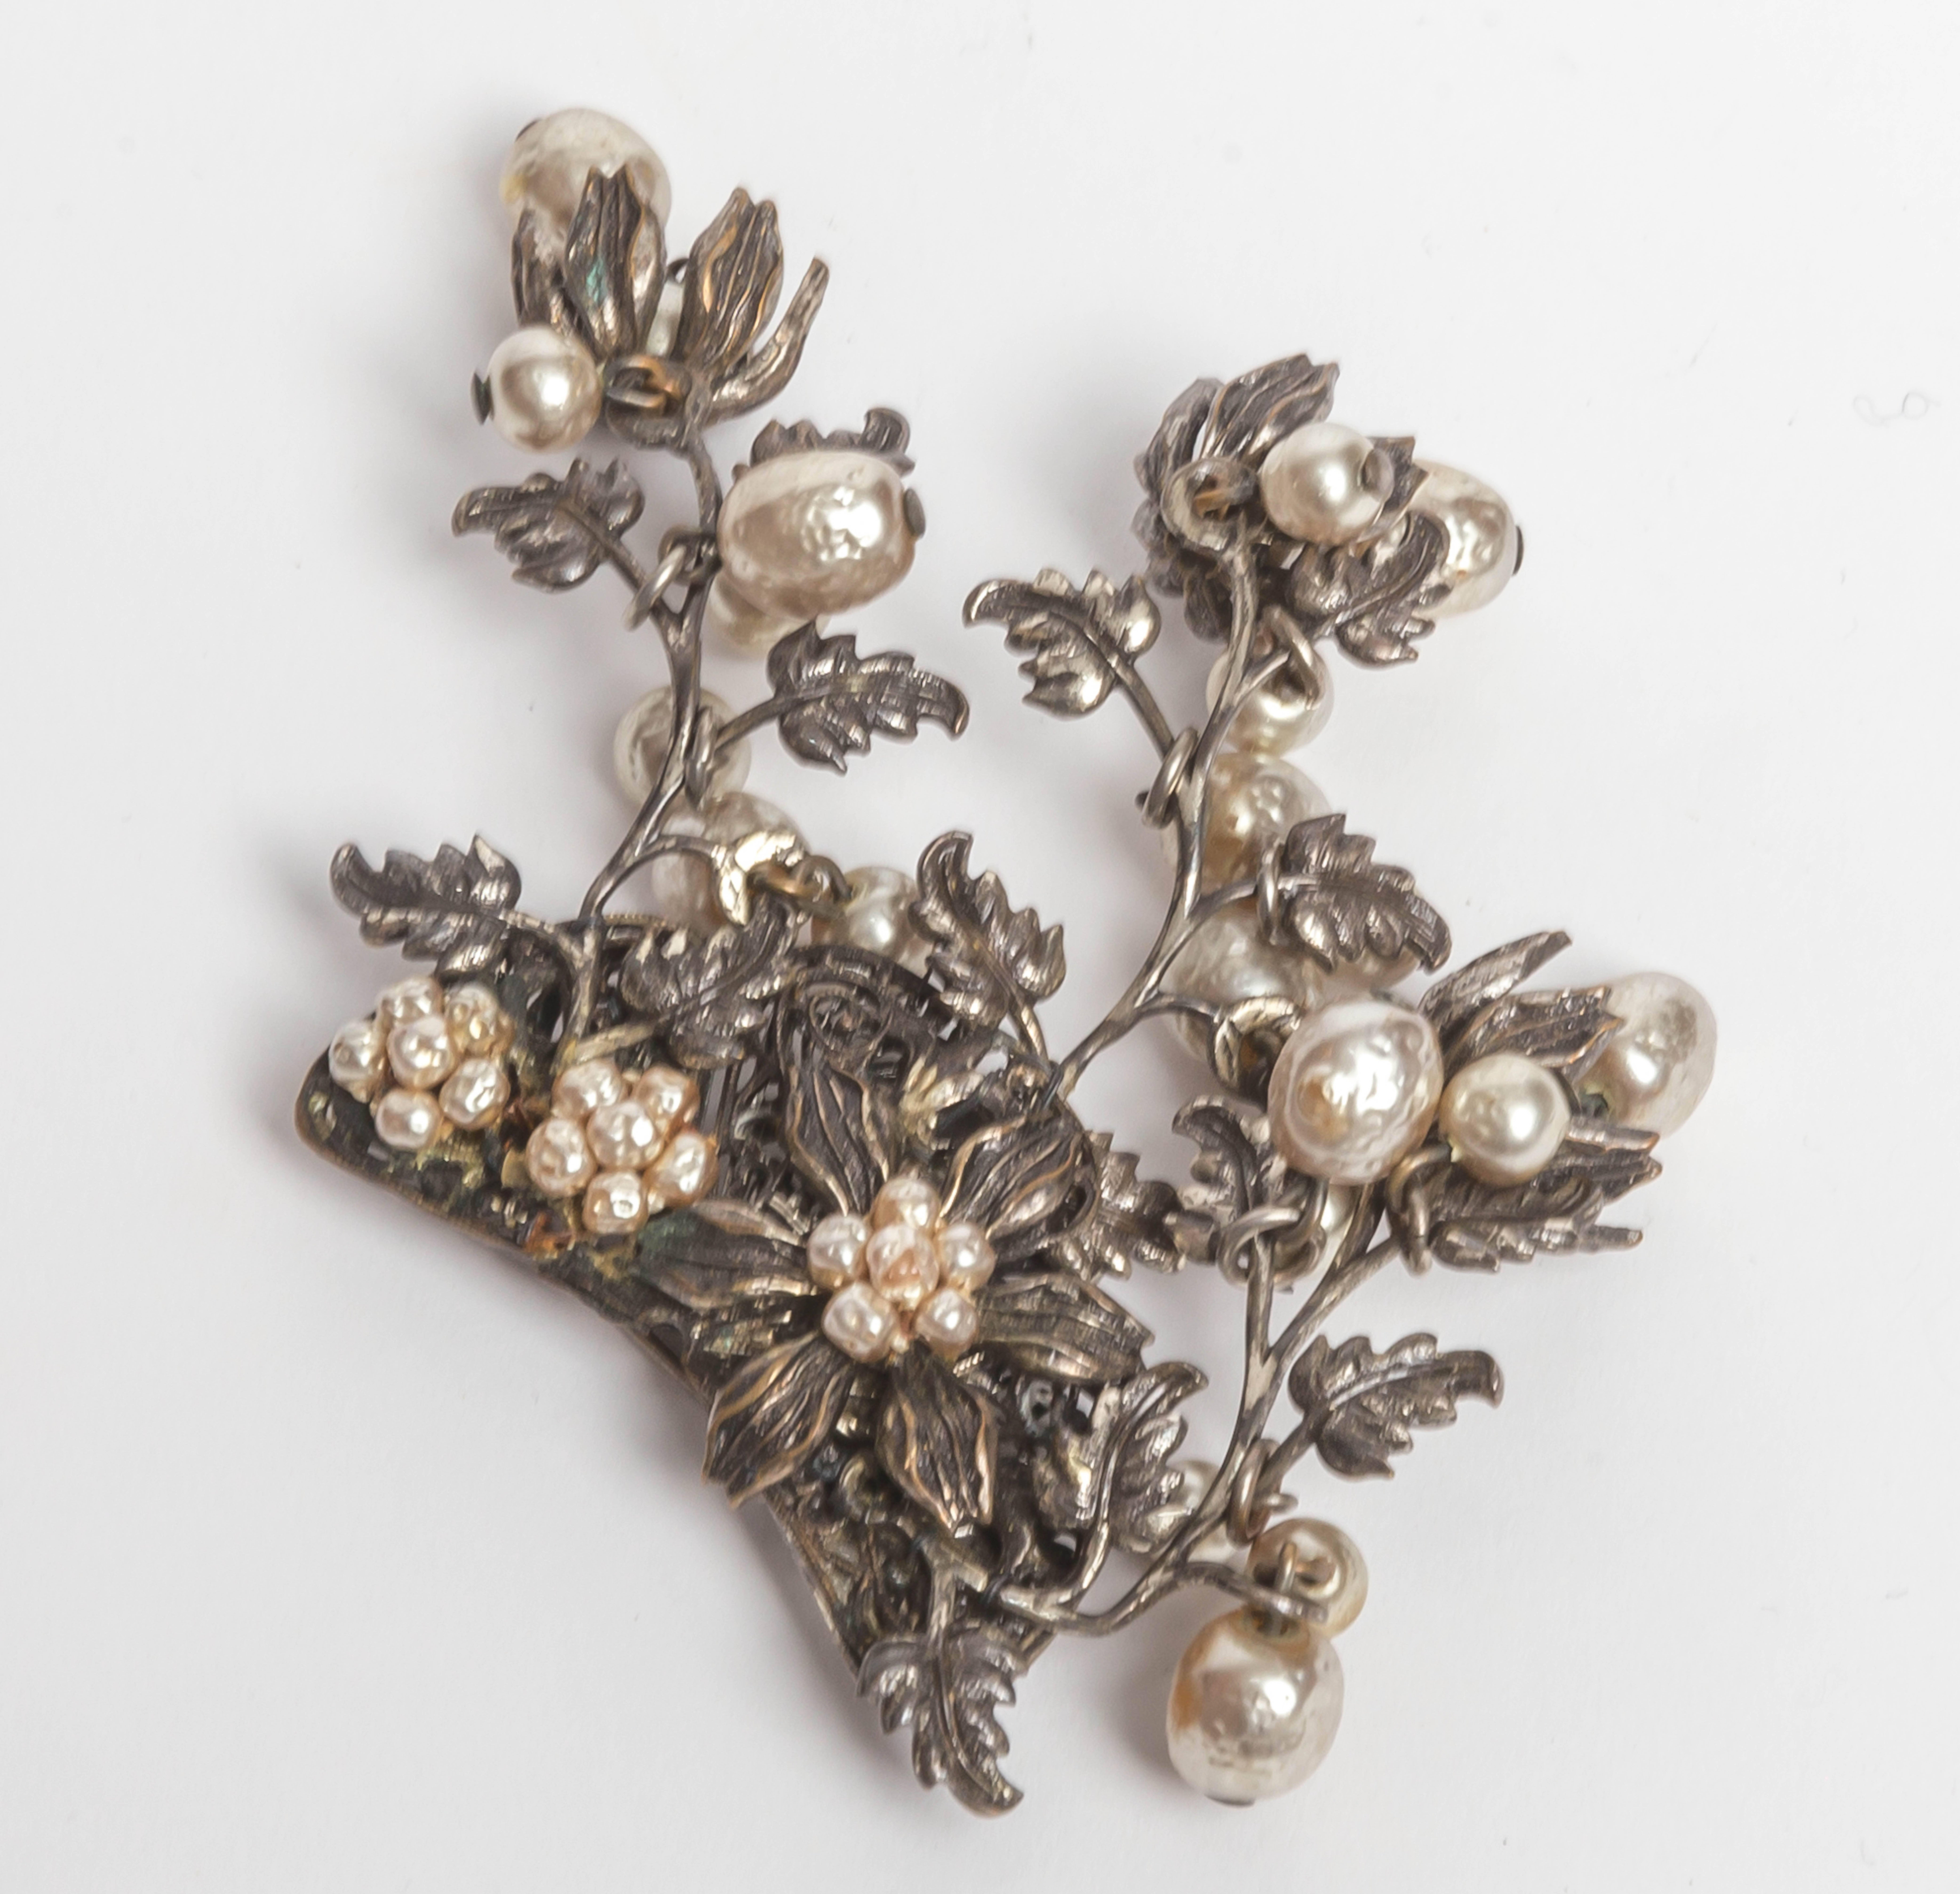 Stunning Miriam Haskell Signed Brooch.
Measuring 3 inches x 3 inches (at widest points), this brooch has wonderful movement. The pearls drop from a white metal base flower spray,
Incredibly elegant and in wonderful condition.